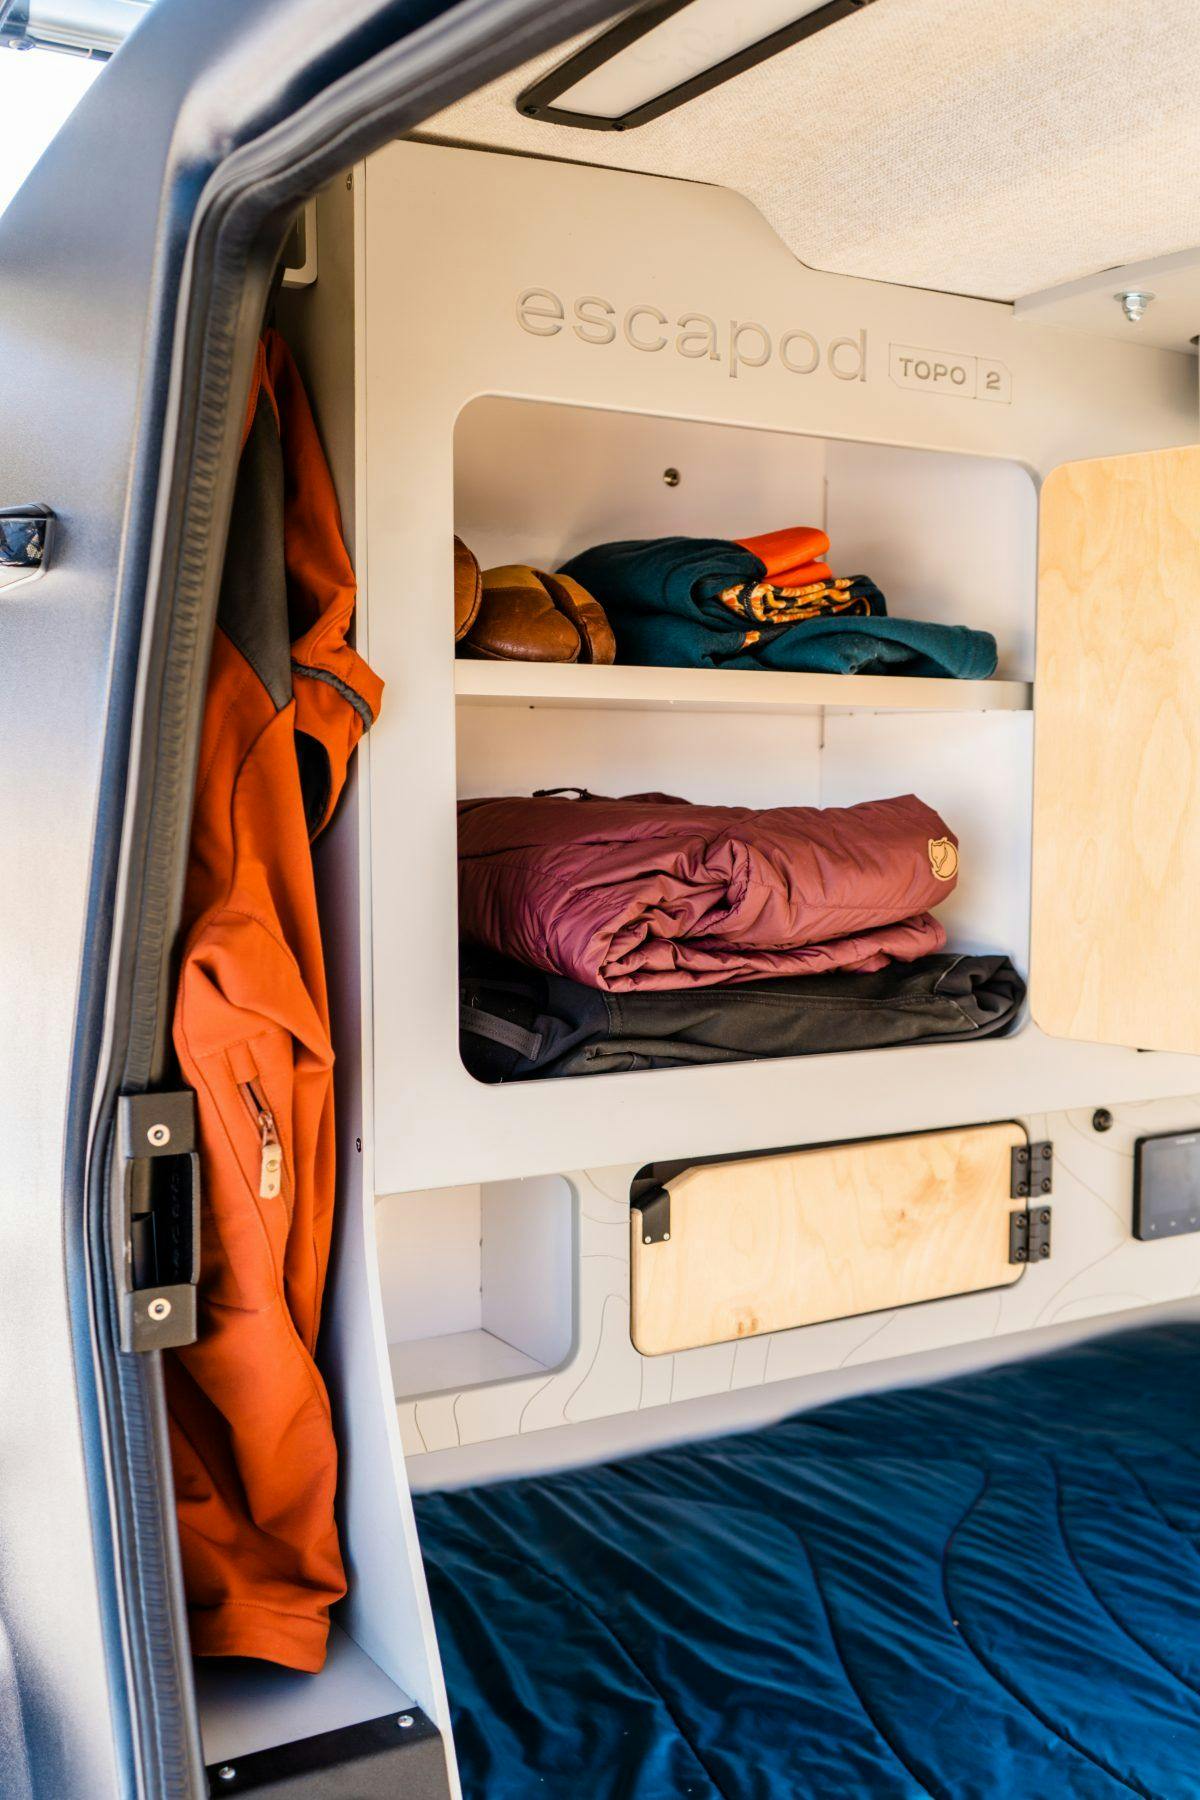 The interior of a teardrop trailer, fully stocked with clothing for a camping trip.